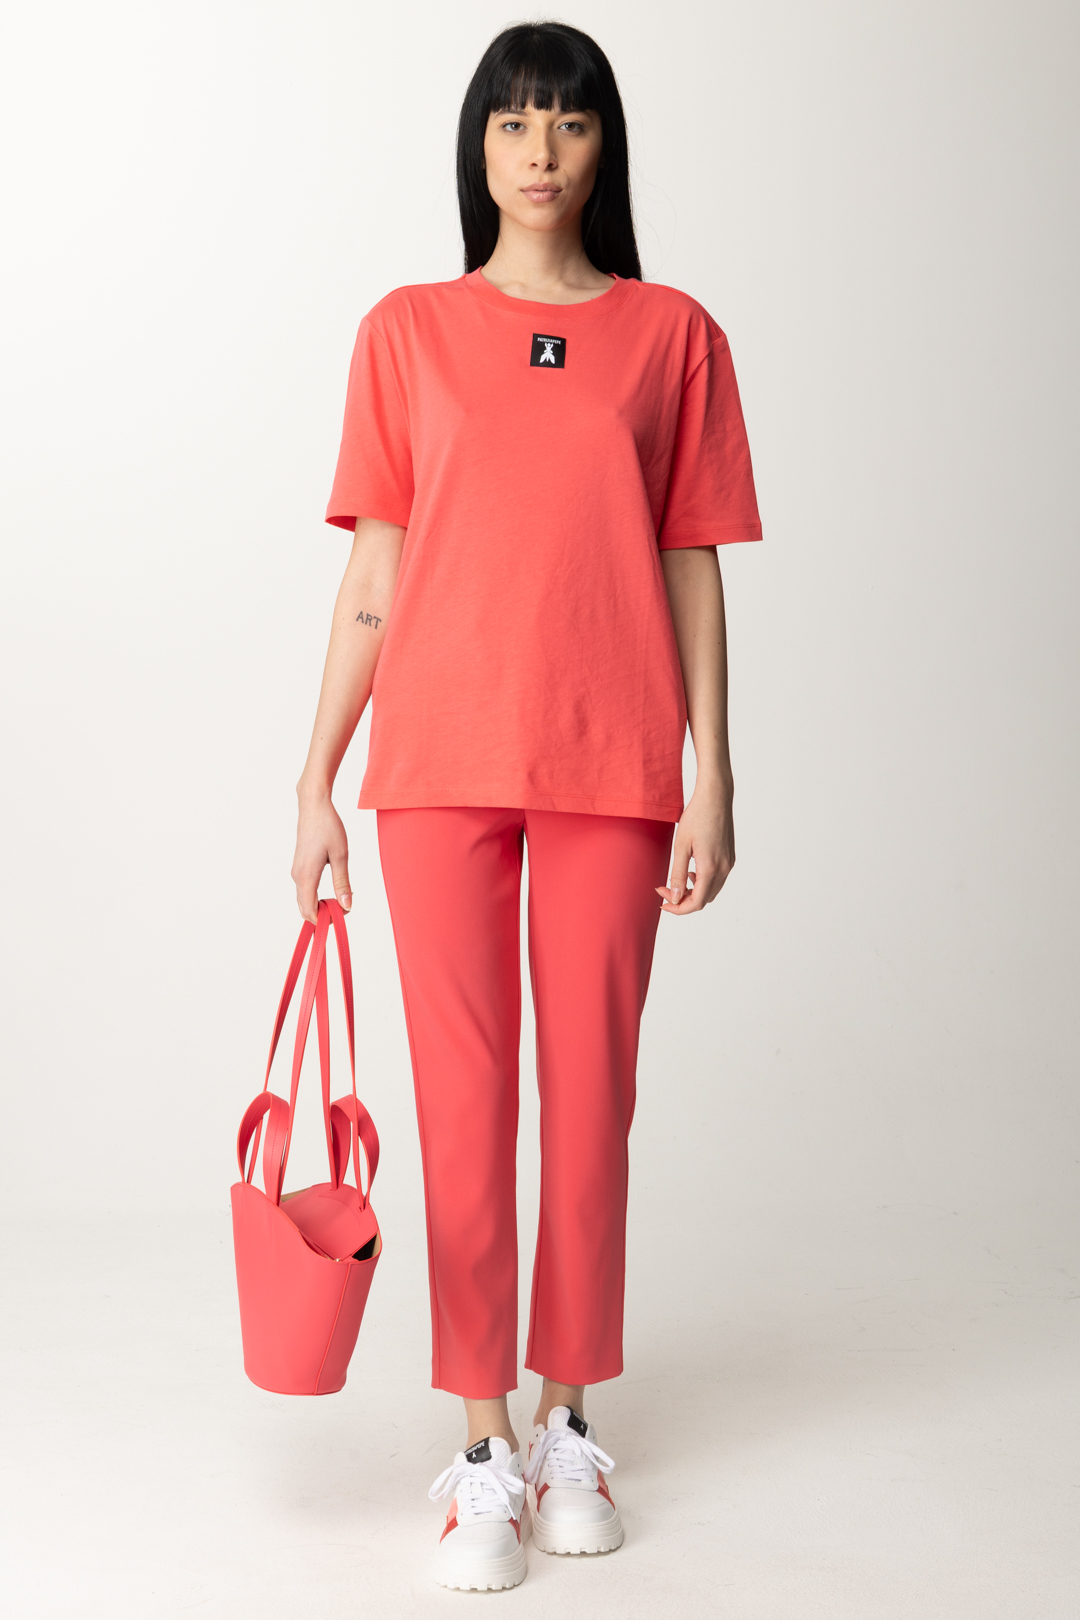 Preview: Patrizia Pepe Cotton t-shirt with Fly Logo HyBrid Rose